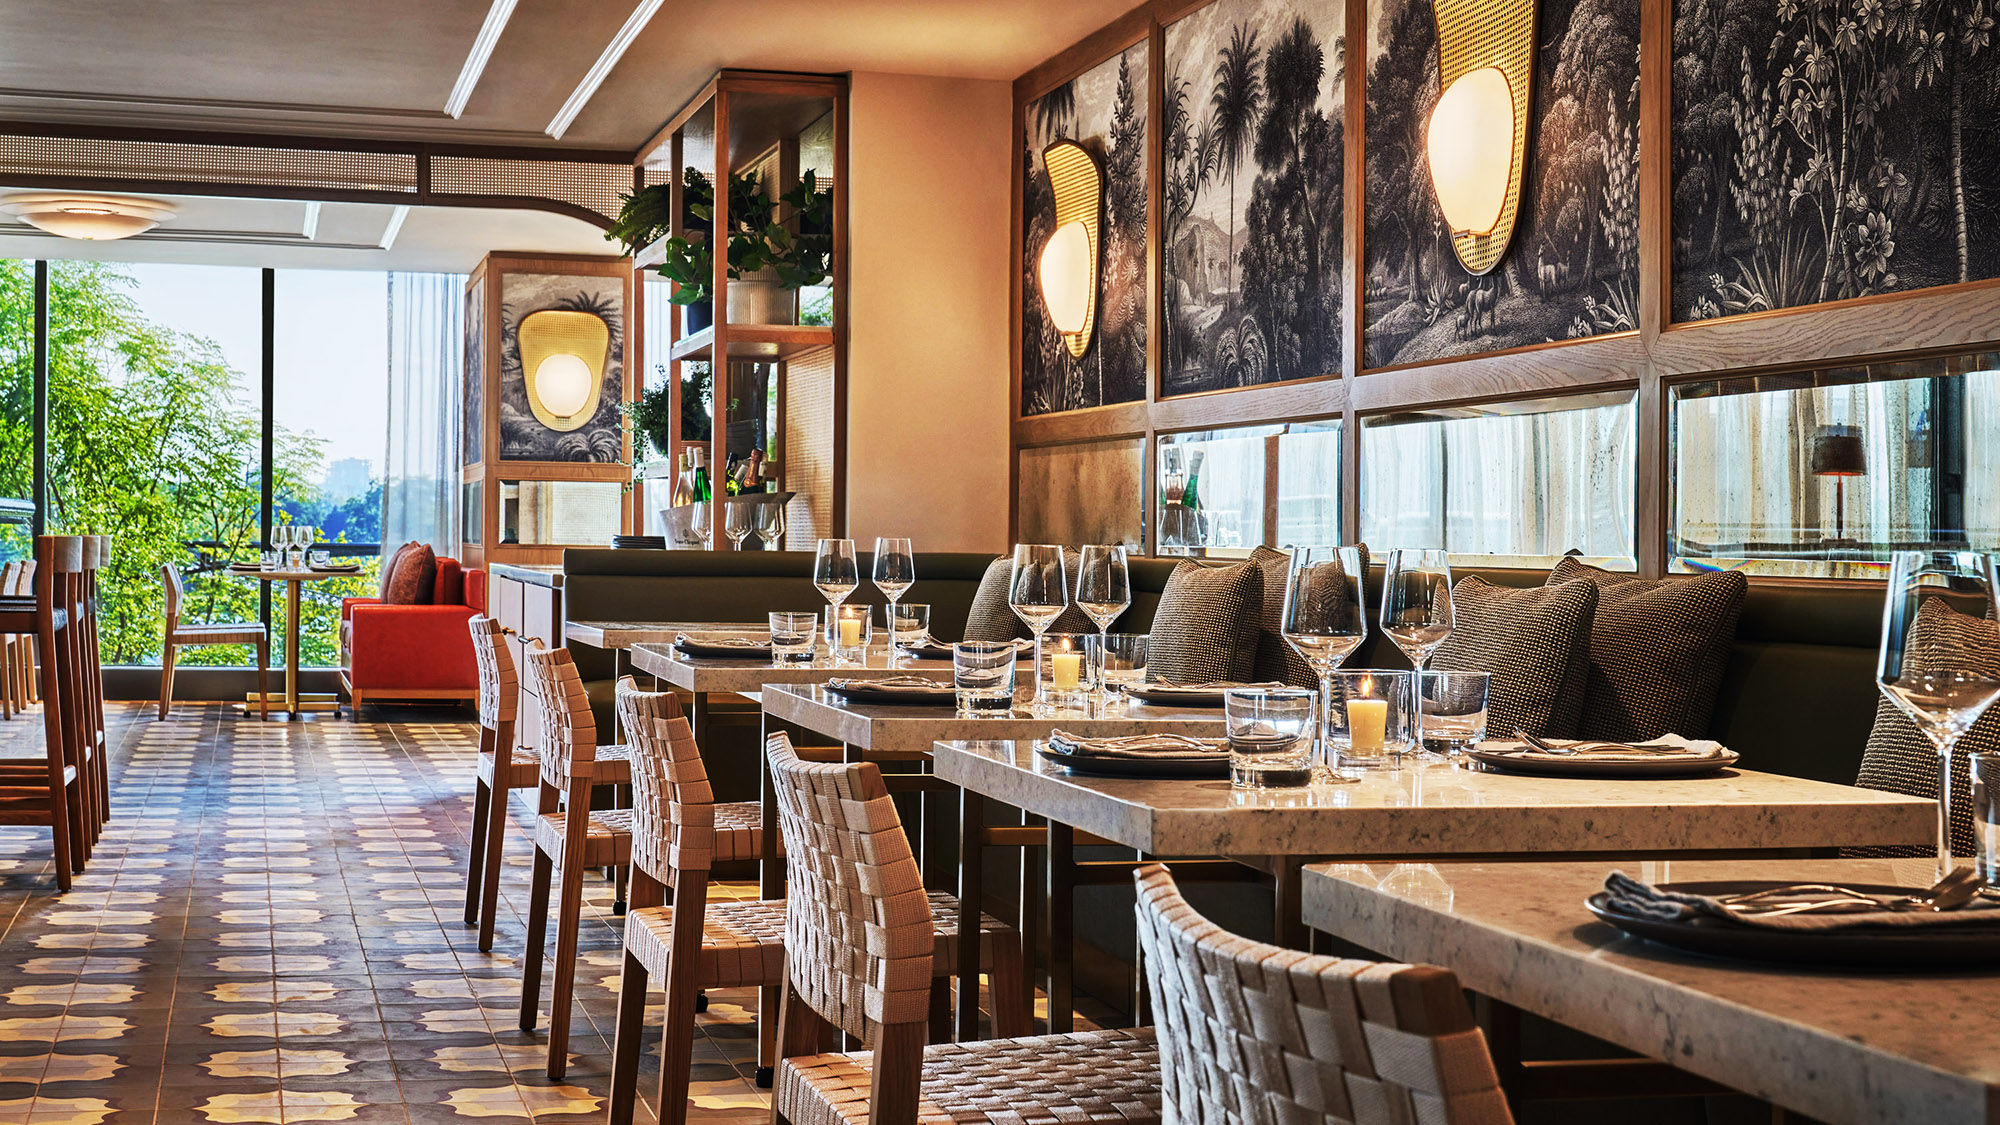 The Pendry Washington D.C. – The Wharf's Flora Flora is an all-day restaurant serving Mexican and Peruvian fare.